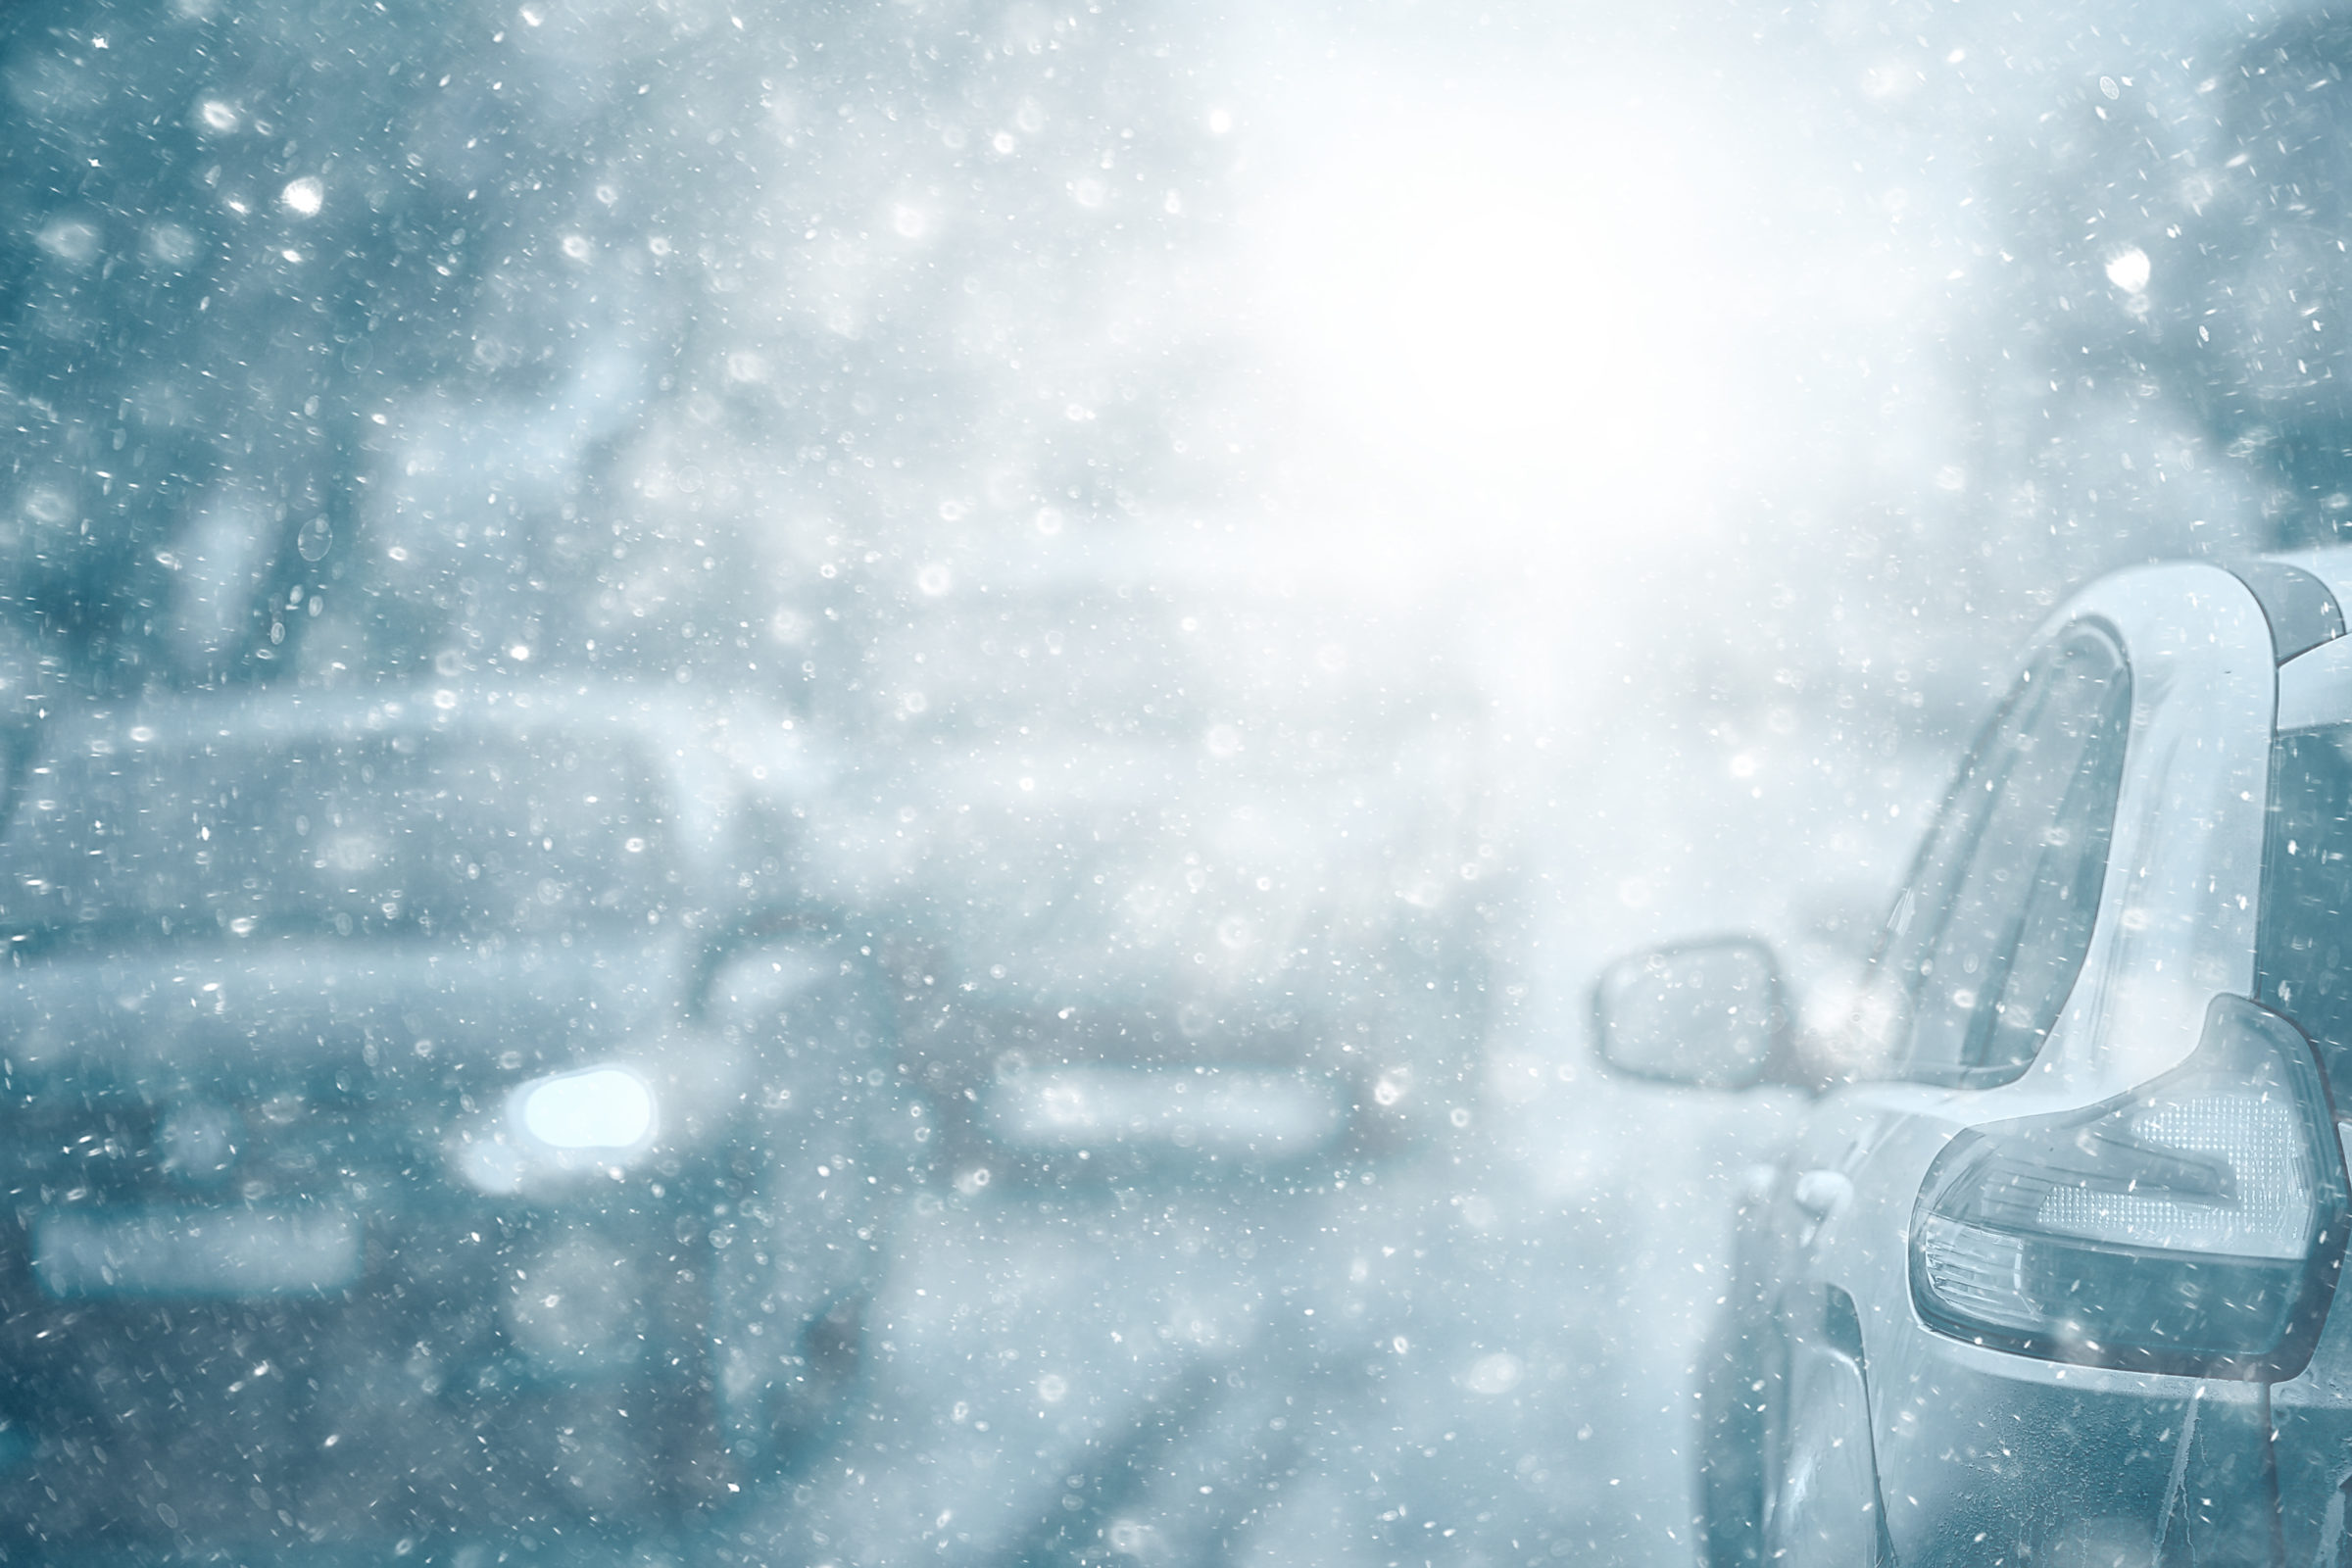 Winter Driving Safety Tips for Whiteouts & Black Ice